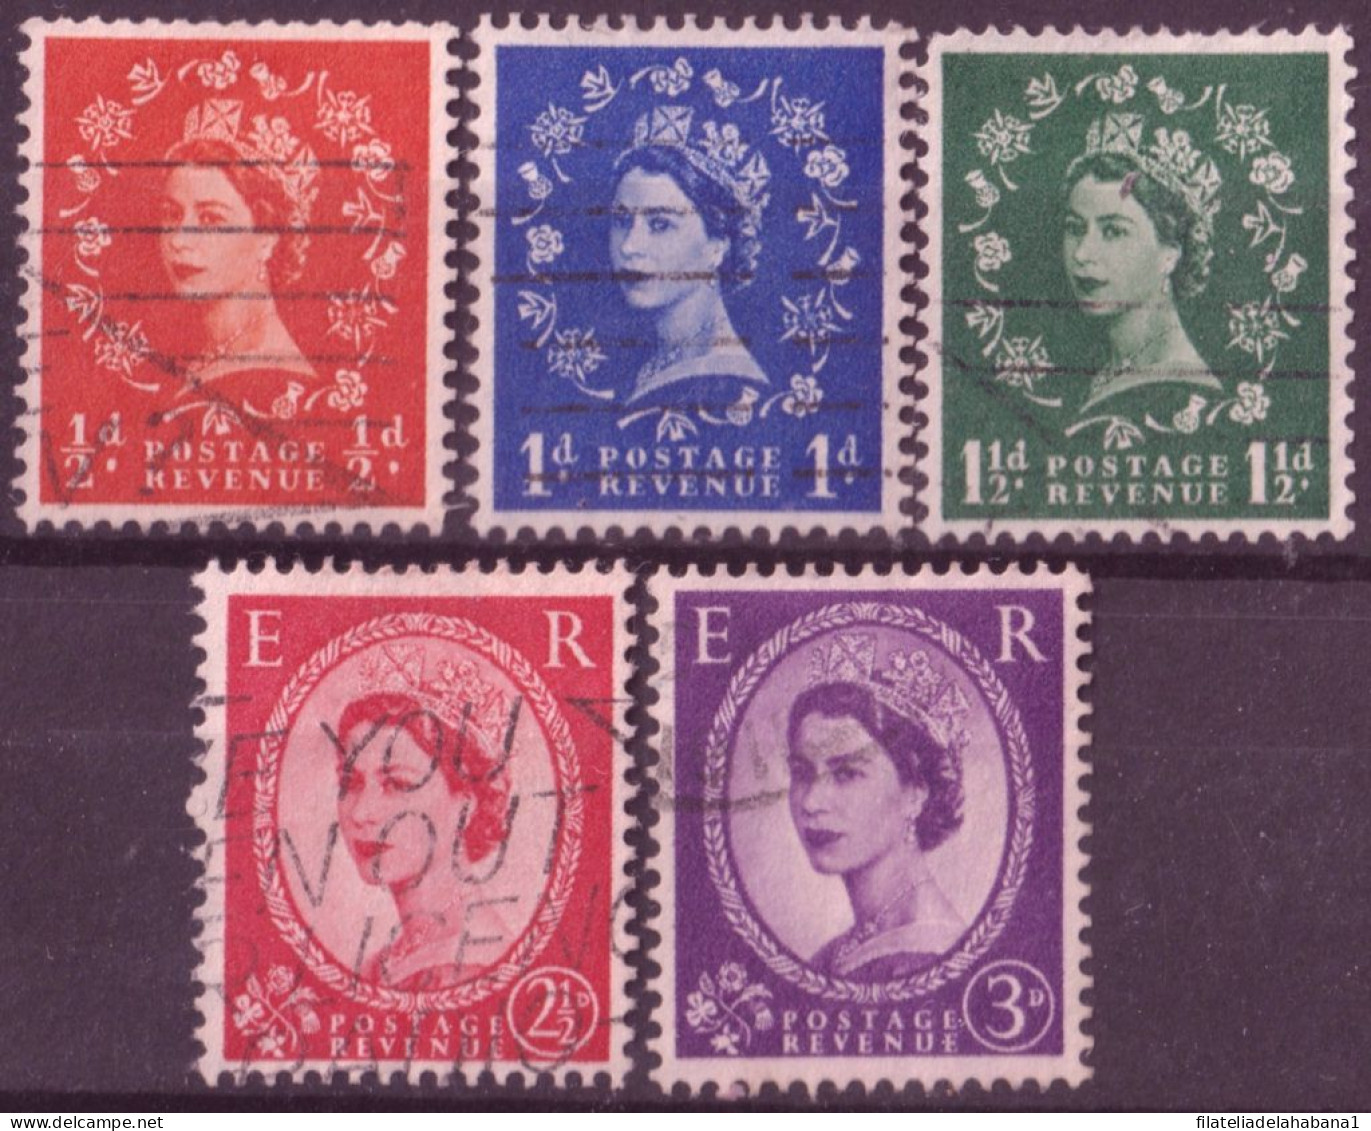 F-EX50267 ENGLAND UK GB 1958 USED QUEEN ELIZABETH INVERTED WATERMARK.  - Used Stamps